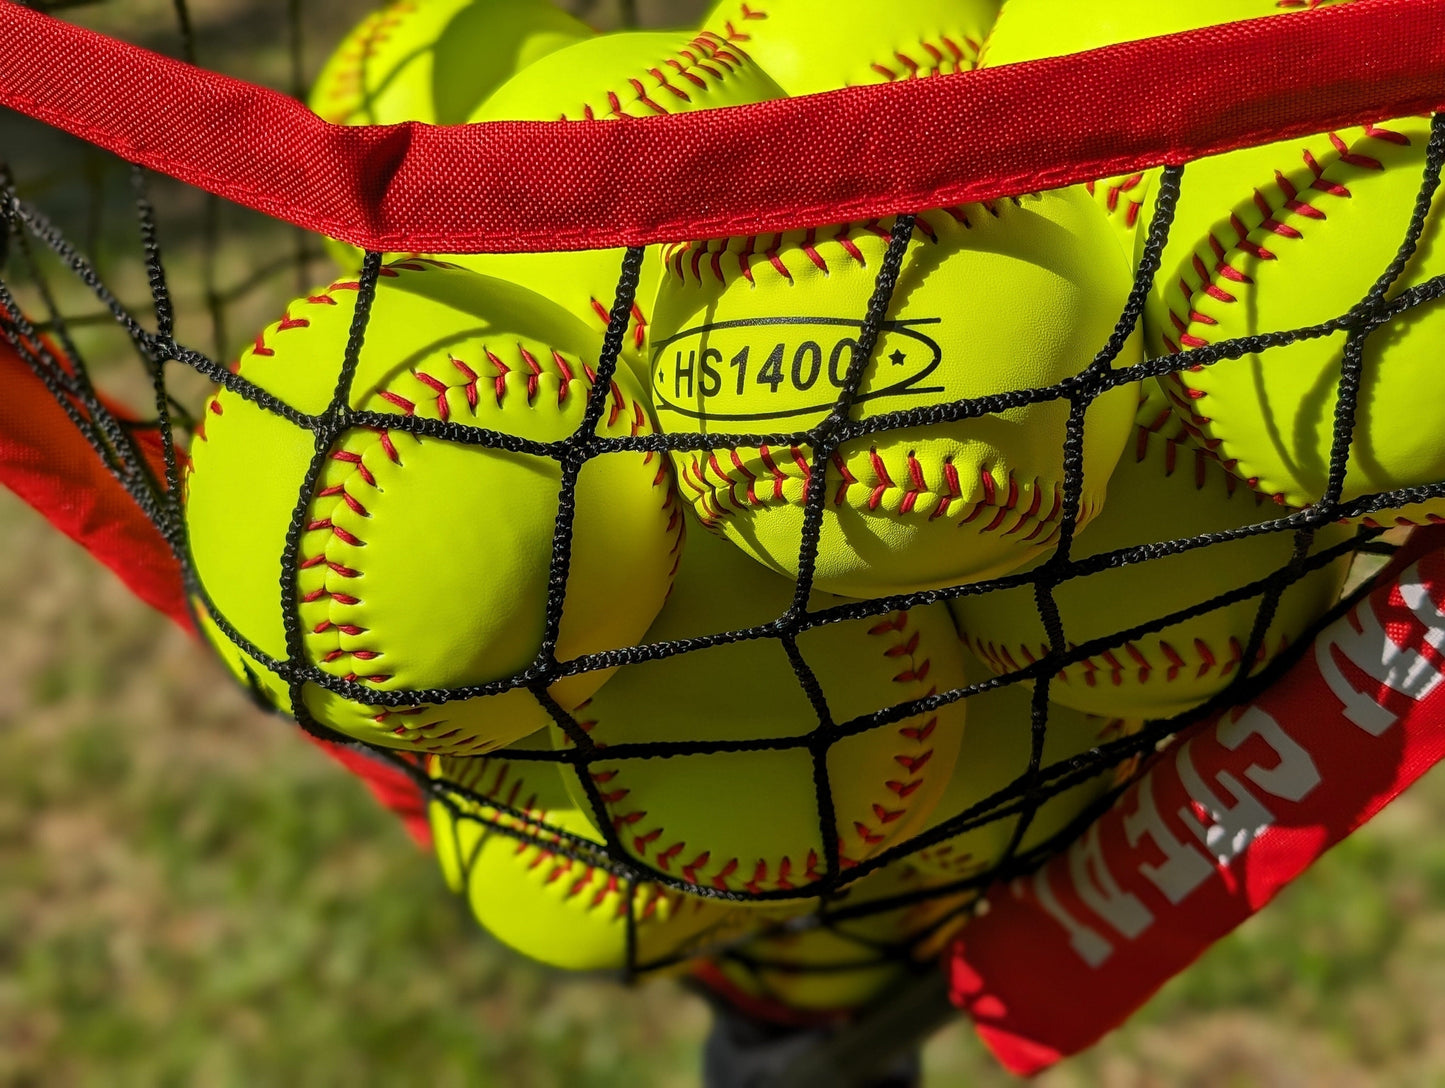 Hit Run Steal Fastpitch Game Softballs - Official 12 inch Size and Weight - .47/375